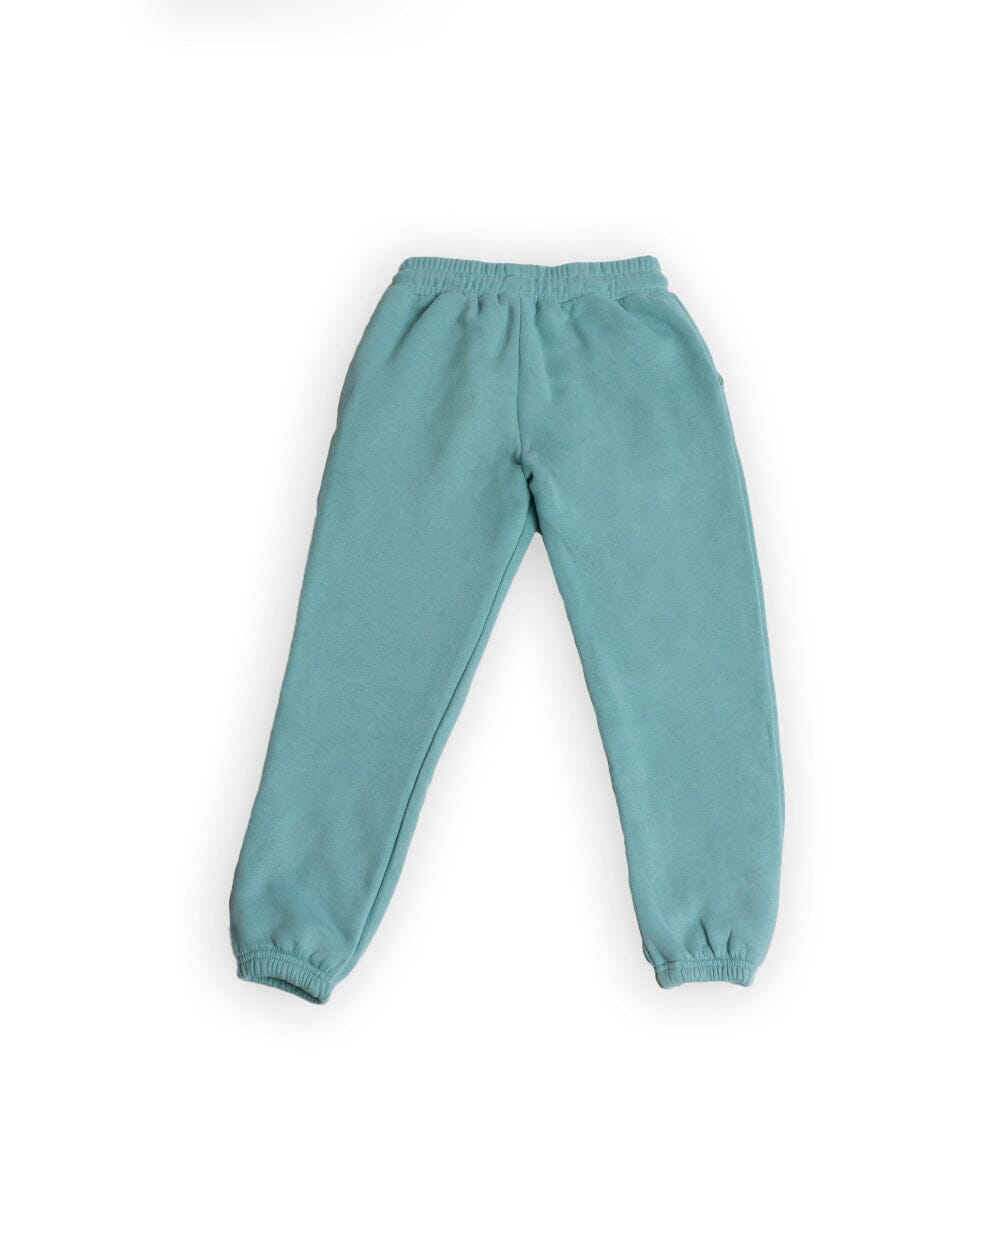 Turquoise Swants (Kids Sweatpants) Swants (Kids) IN YOUR SHOE 